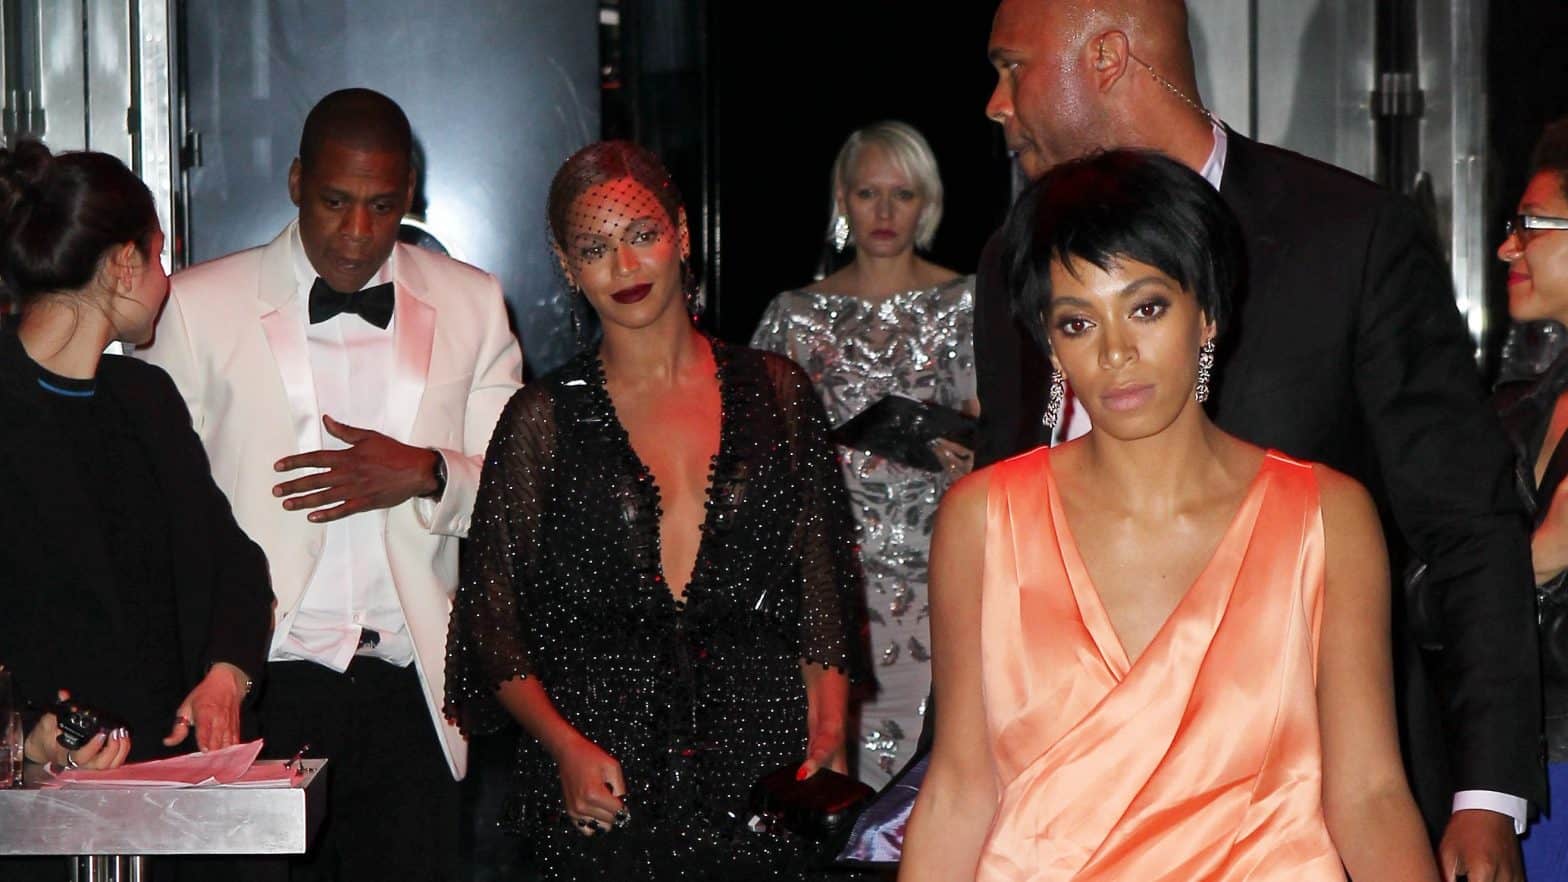 What Happened To Solange And JAY Z In Elevator?